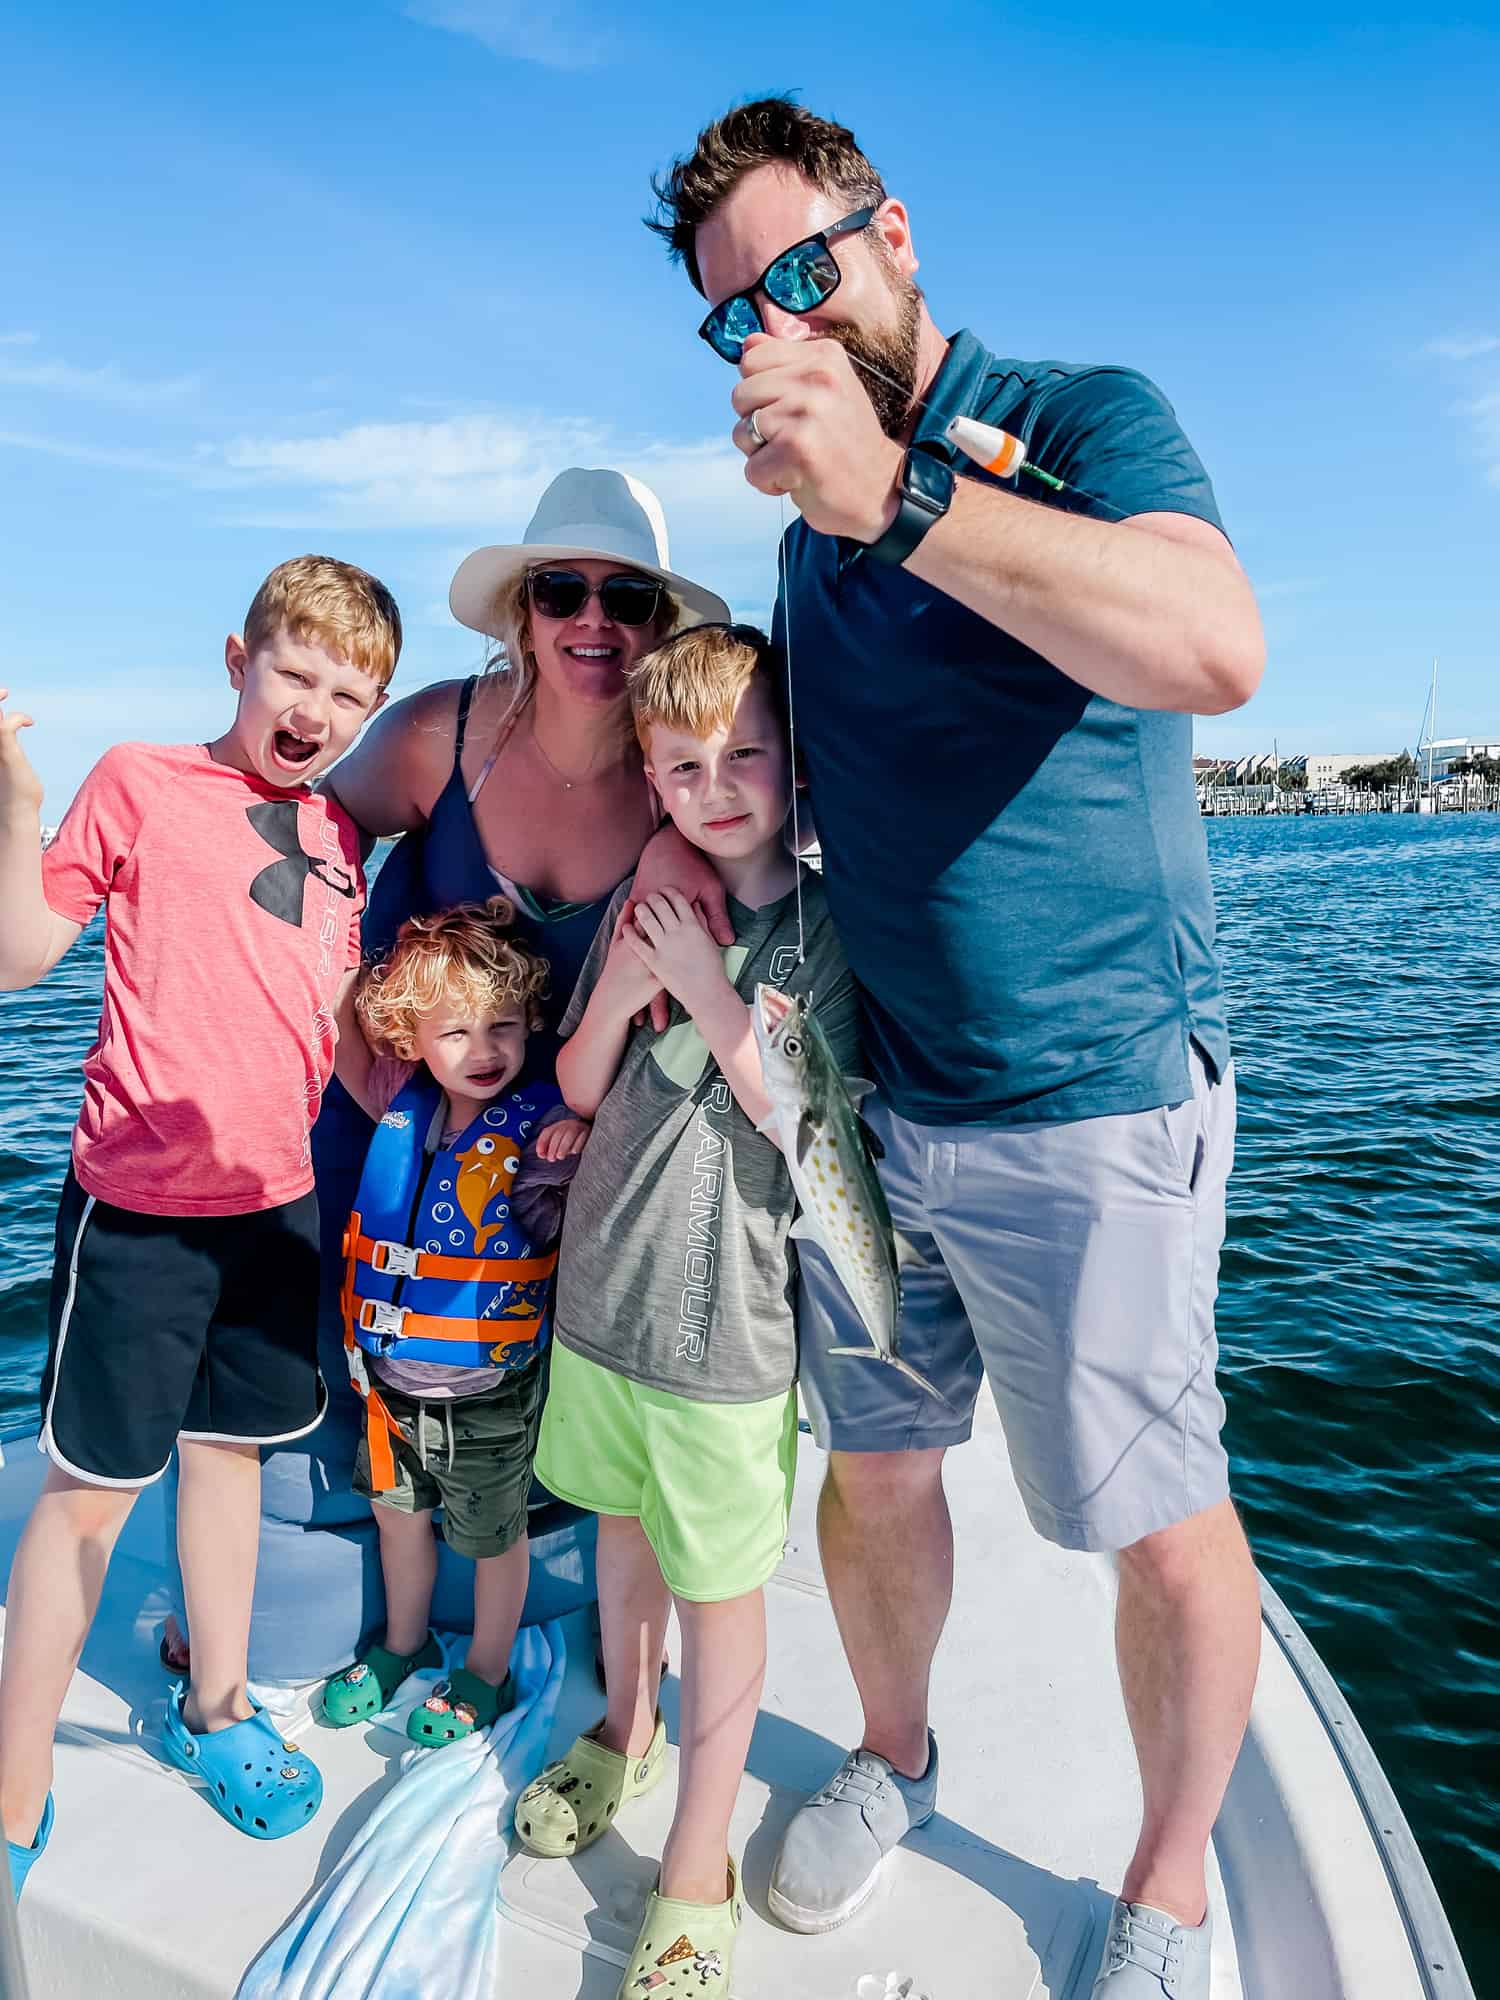 three boys, a mom, and a dad on a boat holding a fish